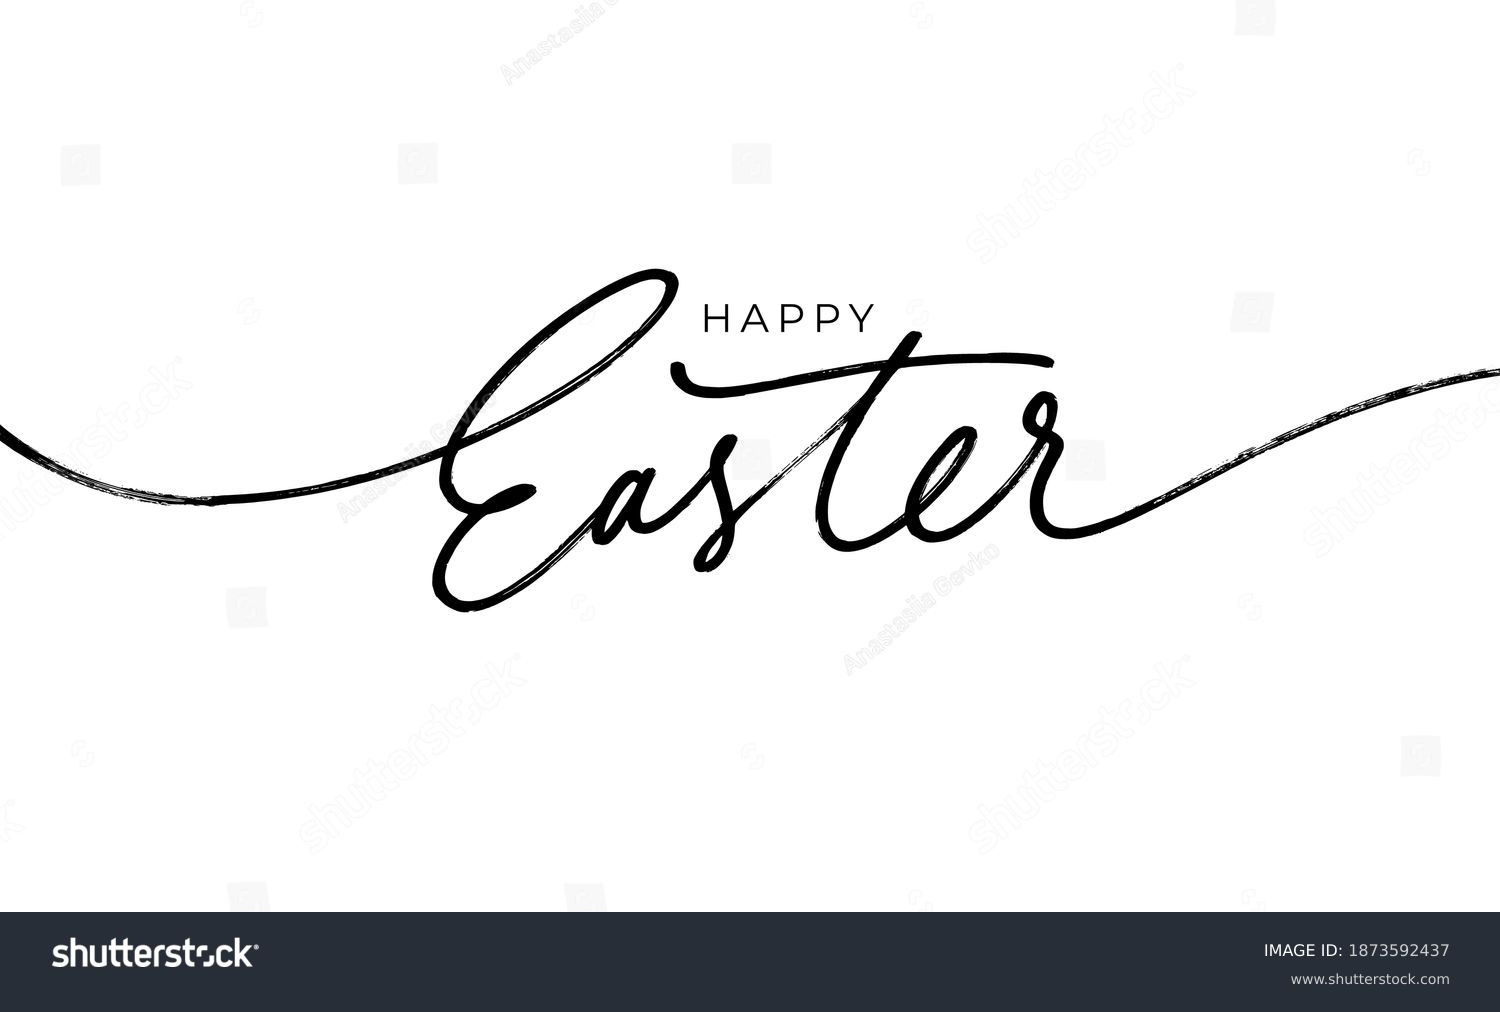 Happy Easter black linear lettering with swooshes. Hand drawn elegant modern vector calligraphy. Design for holiday greeting card and invitation of the happy Easter day. Greeting card text template. #1873592437